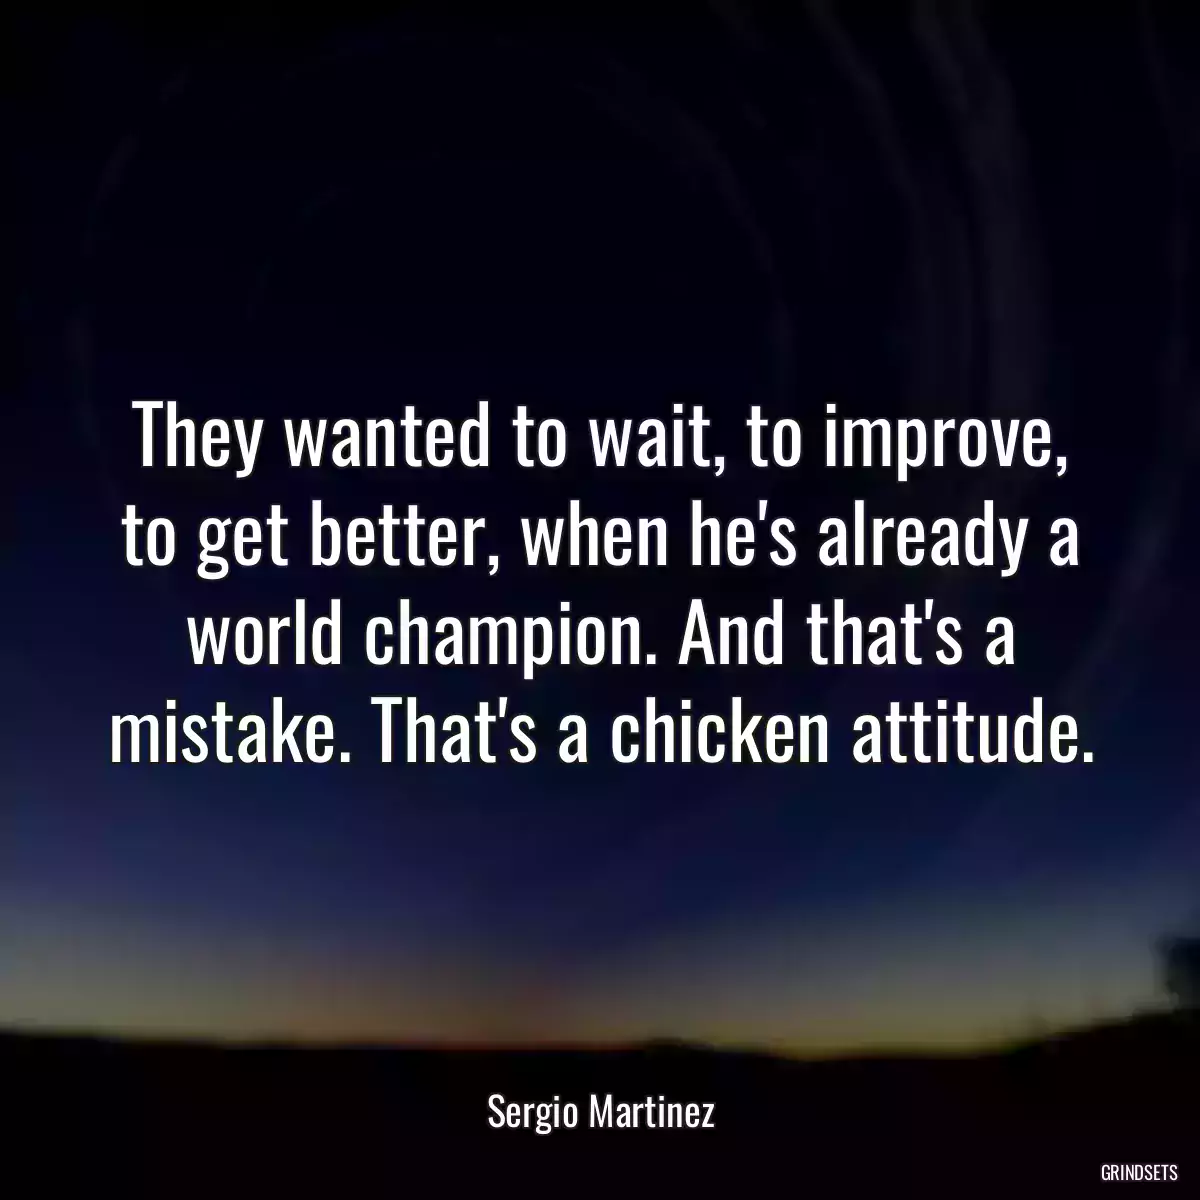 They wanted to wait, to improve, to get better, when he\'s already a world champion. And that\'s a mistake. That\'s a chicken attitude.